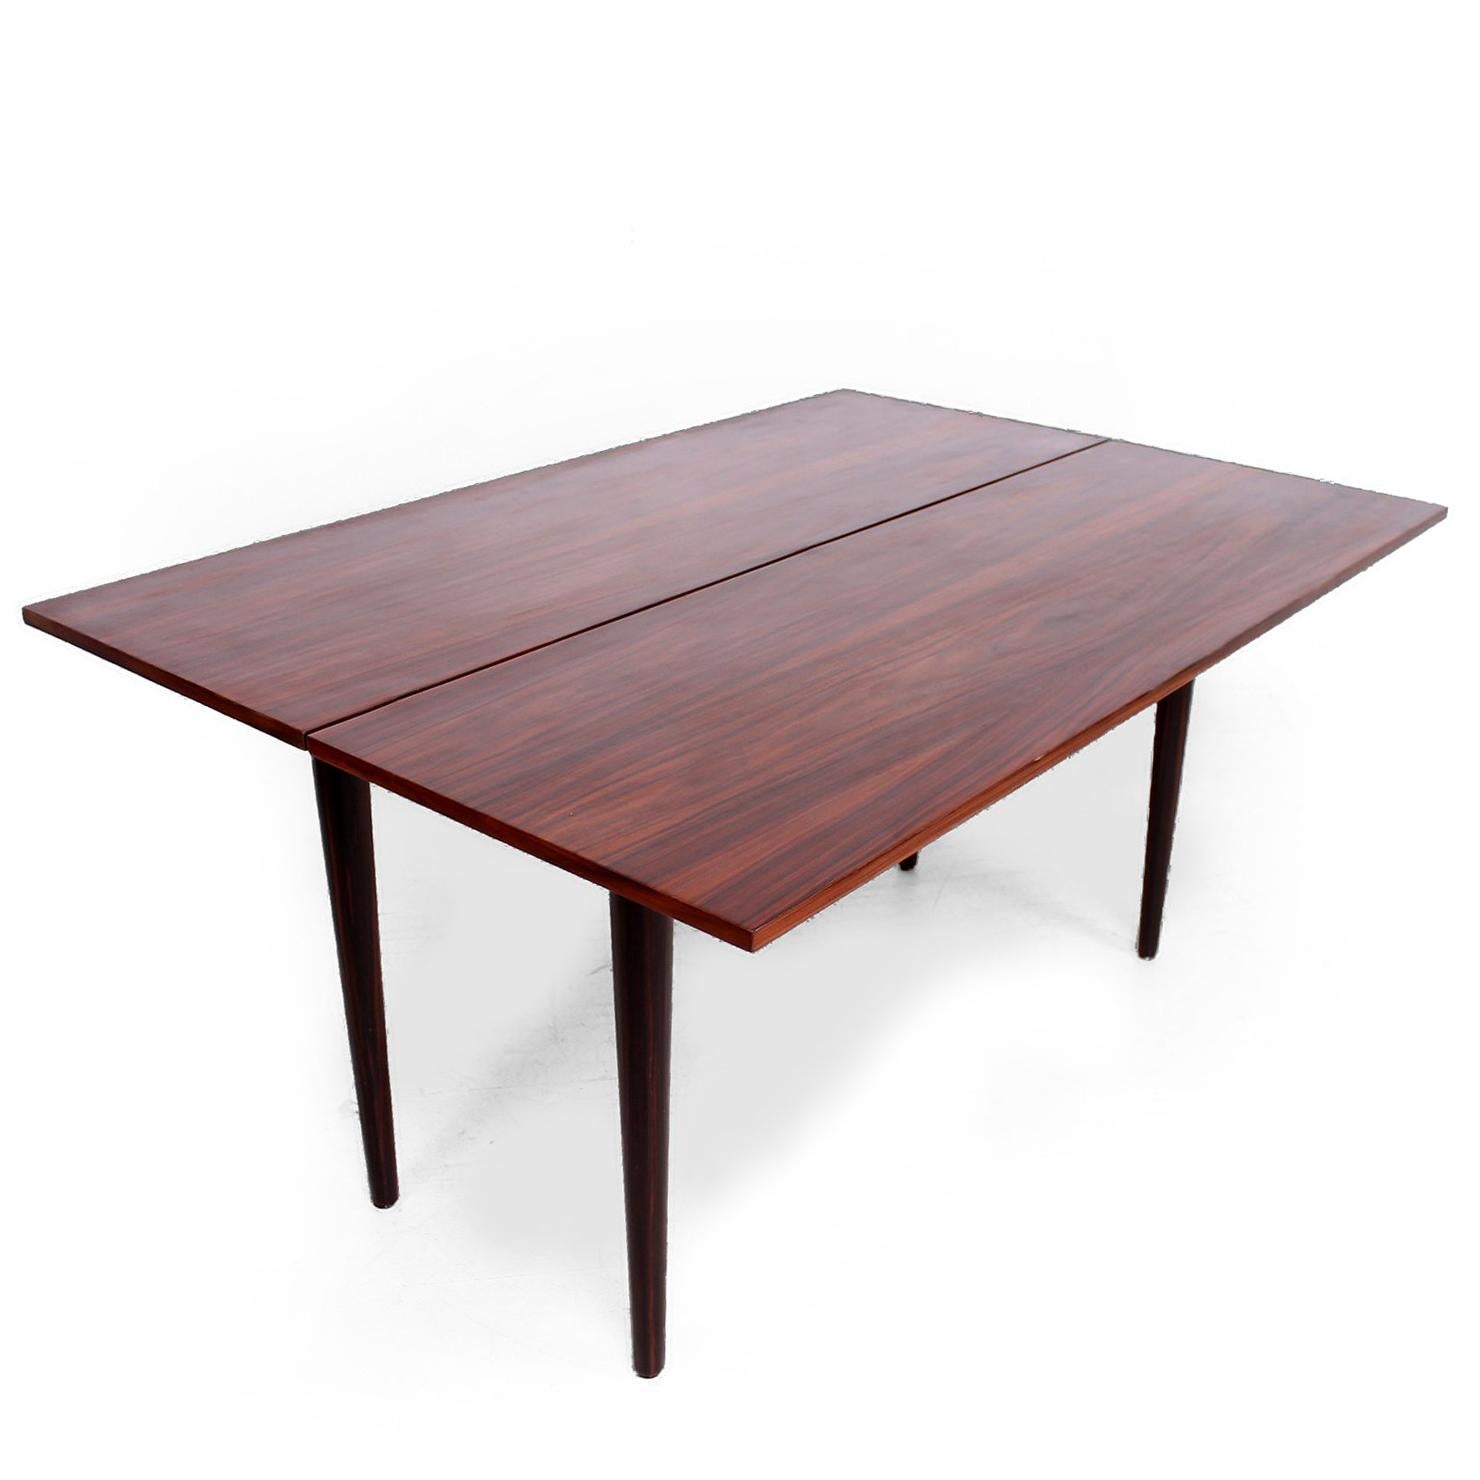 For your consideration a Mid-Century Modern console/dining table made of rosewood and Macassar wood.

The original configuration is a console table which can be expanded into a dining table. 

Unmarked. 
Measures:
31